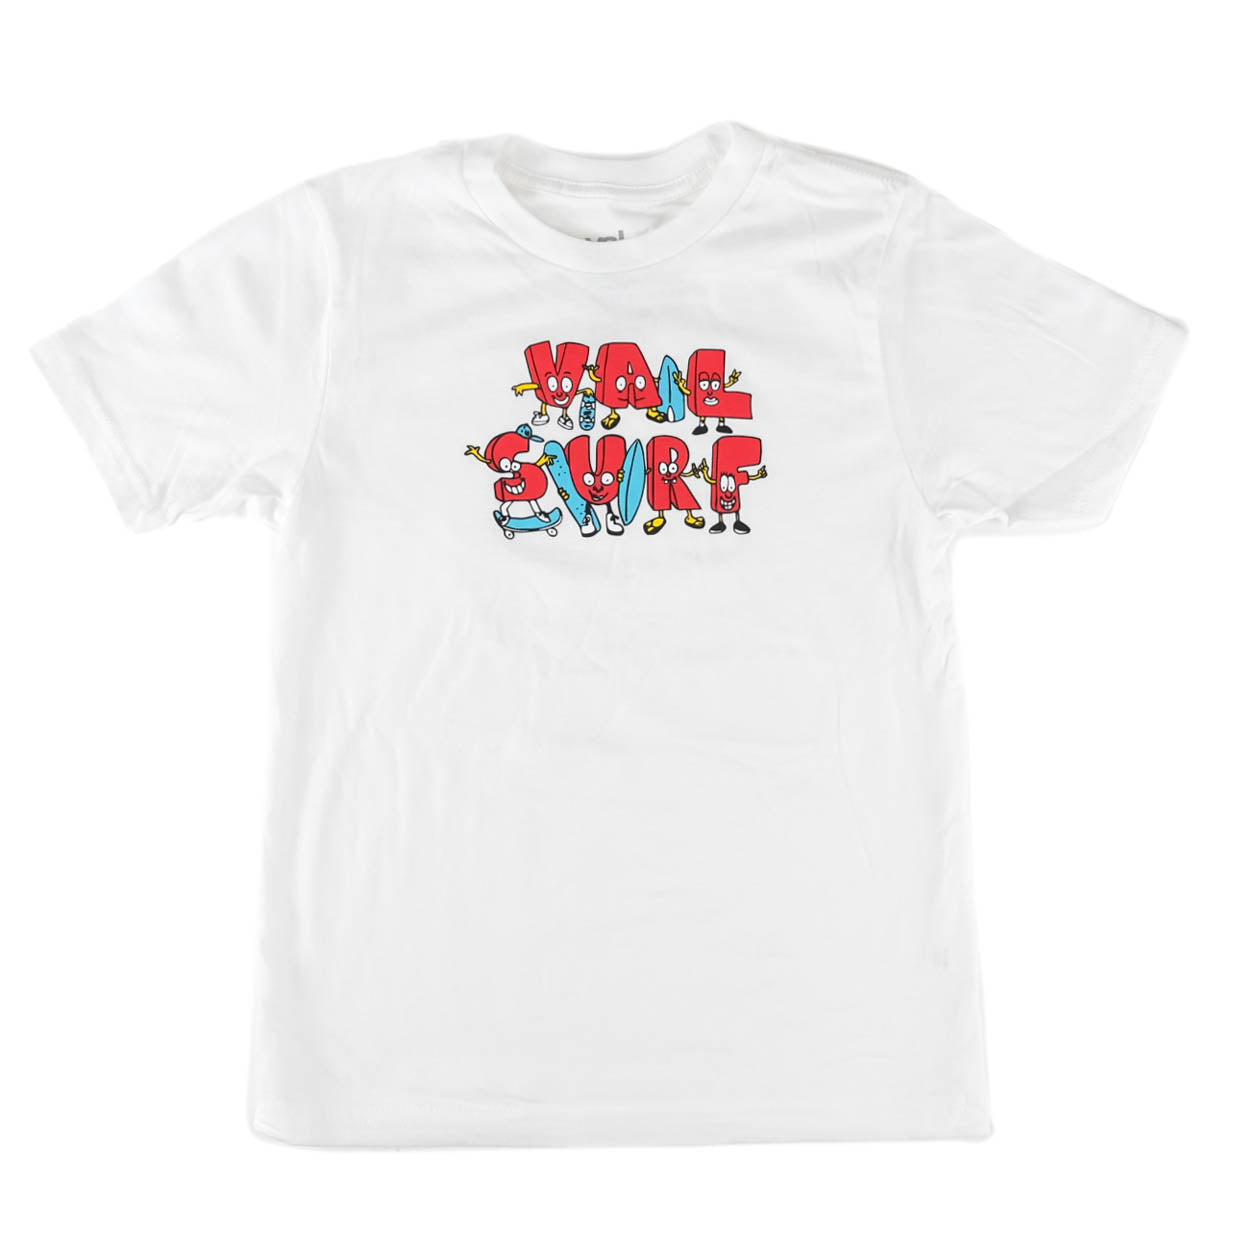 Summer Glaboe Youth Tee - White